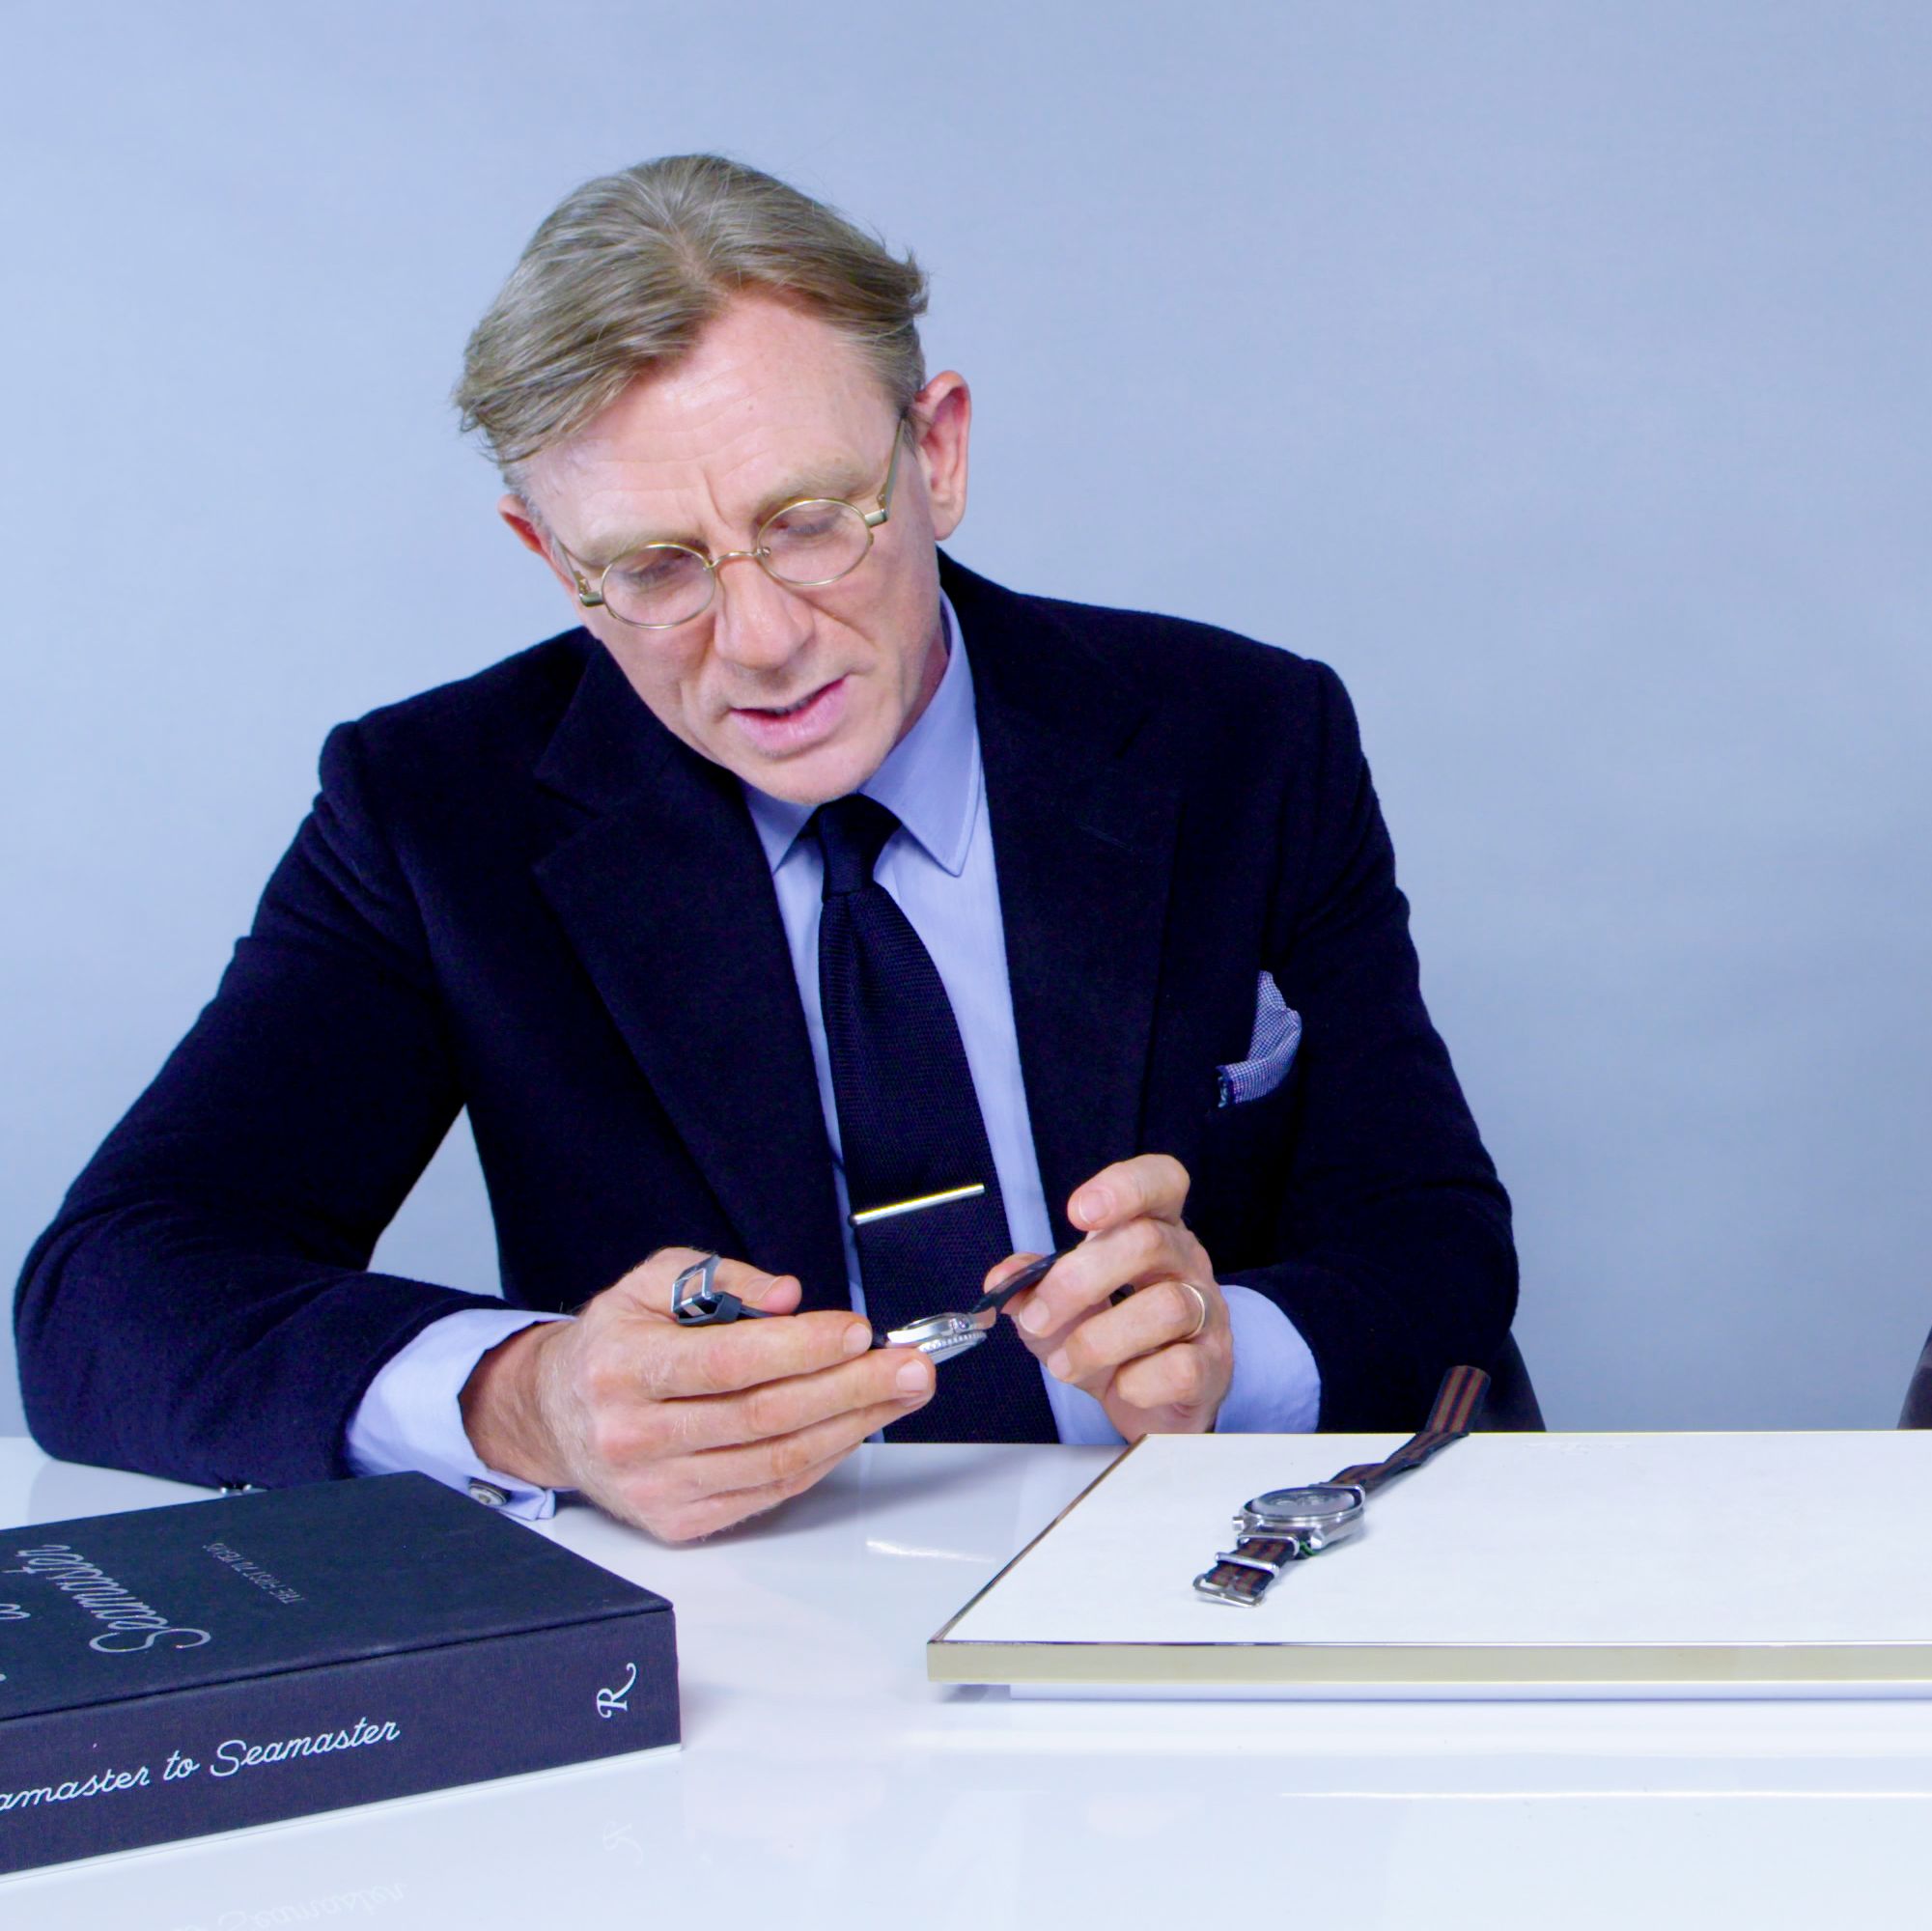 Take a Tour of Daniel Craig's Impressive Omega Watch Collection